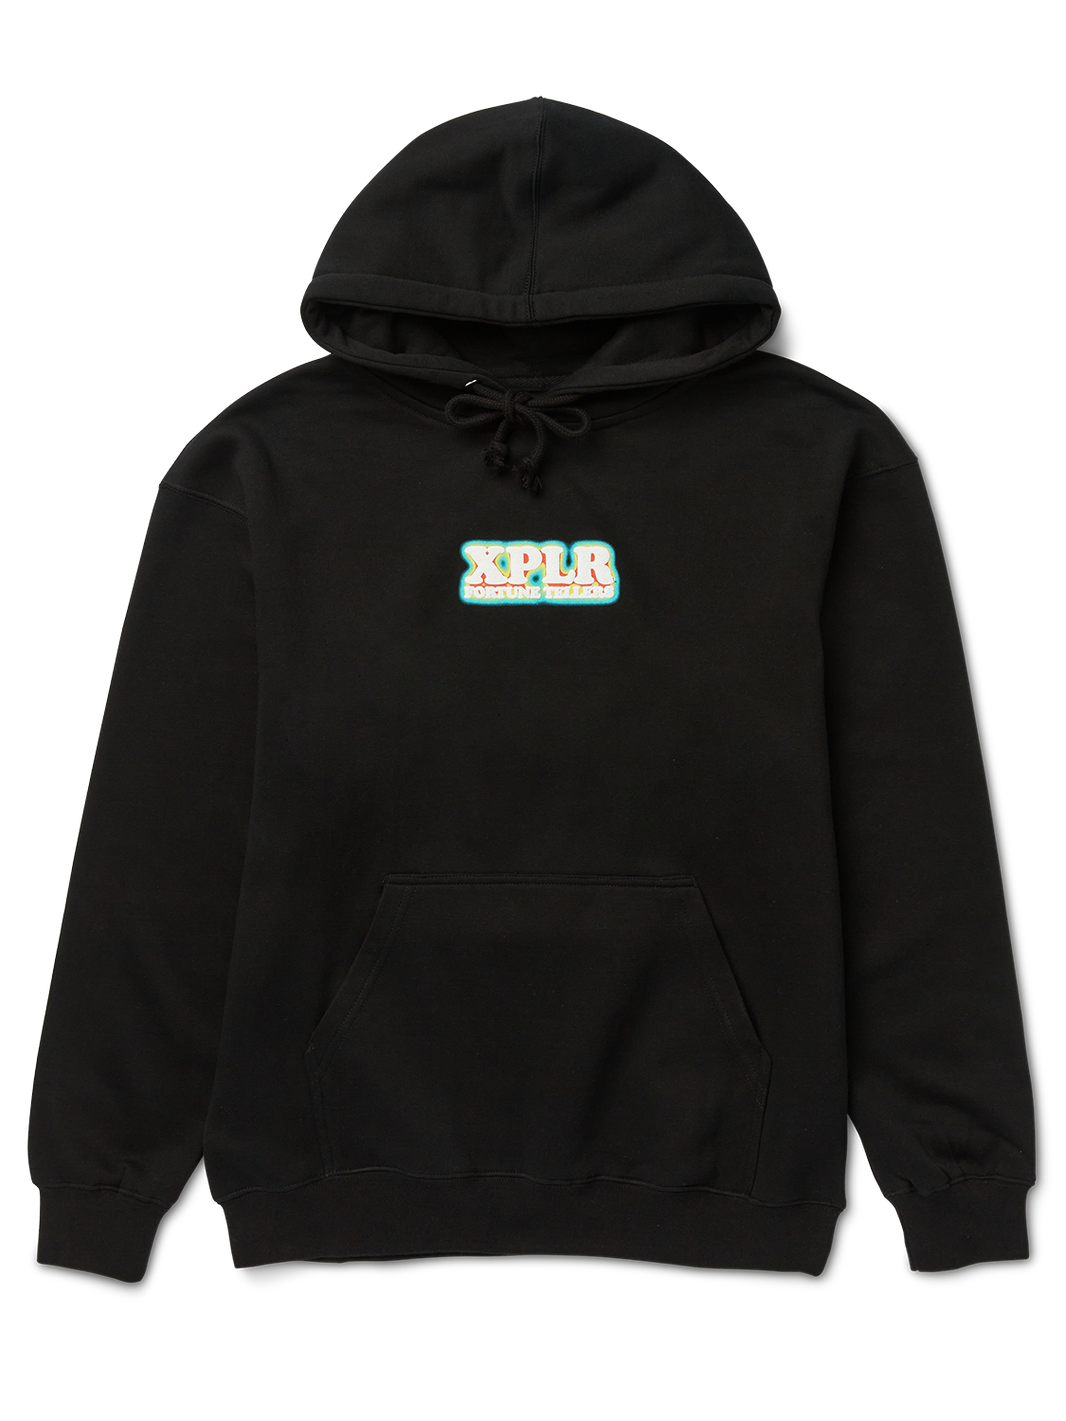 Official XPLR Shop by Sam and Colby